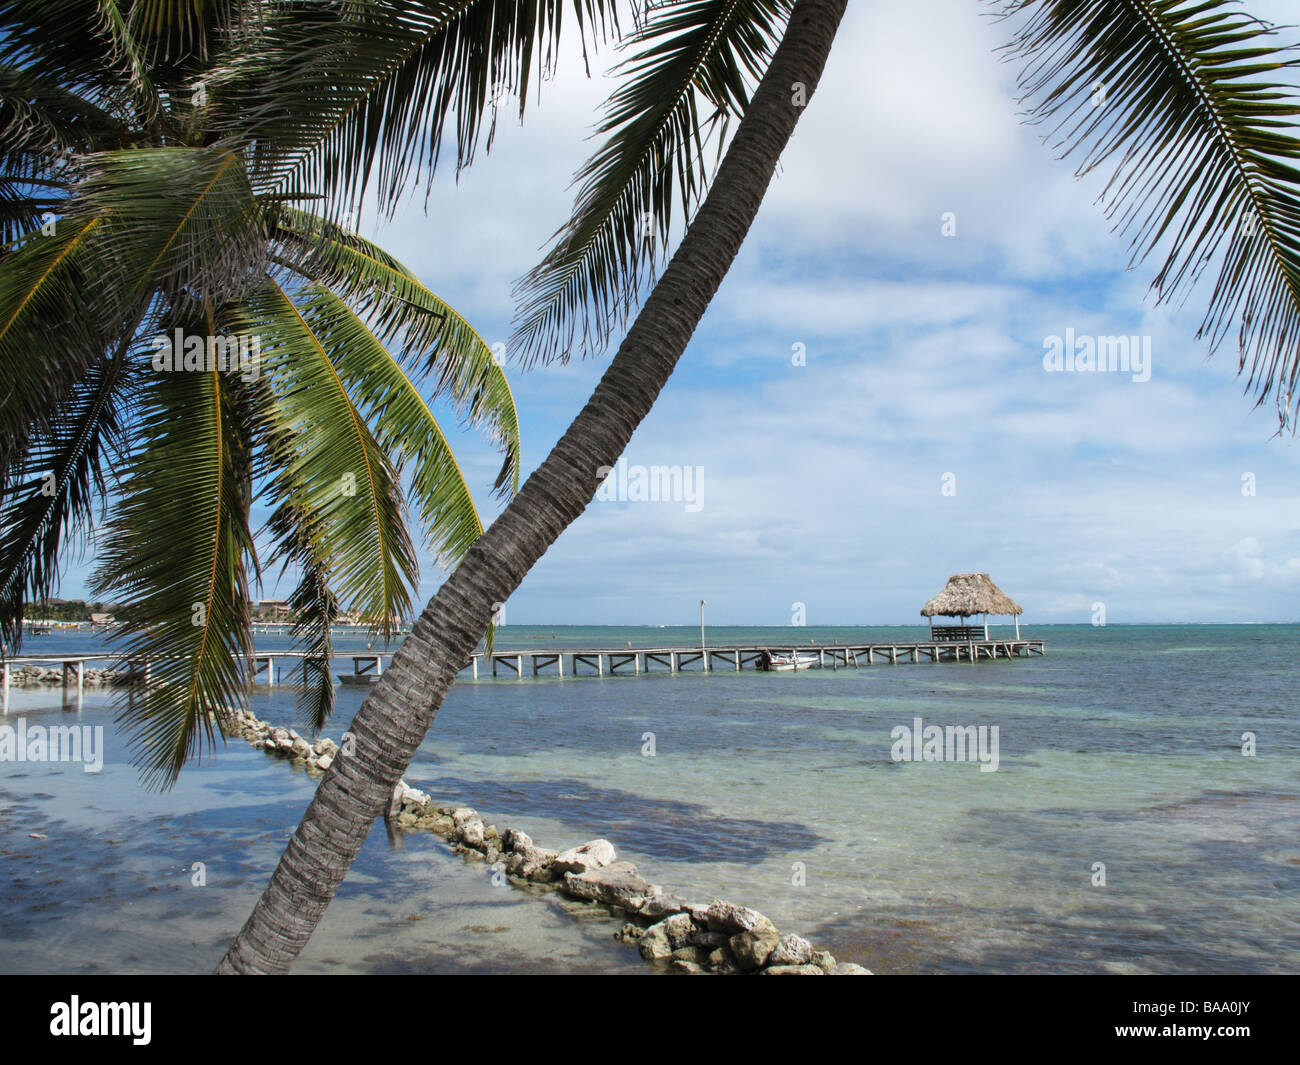 Palms along the shore on a dreamy afternoon with beautiful skies and calm waters on Ambergris Caye in Belize. Stock Photo